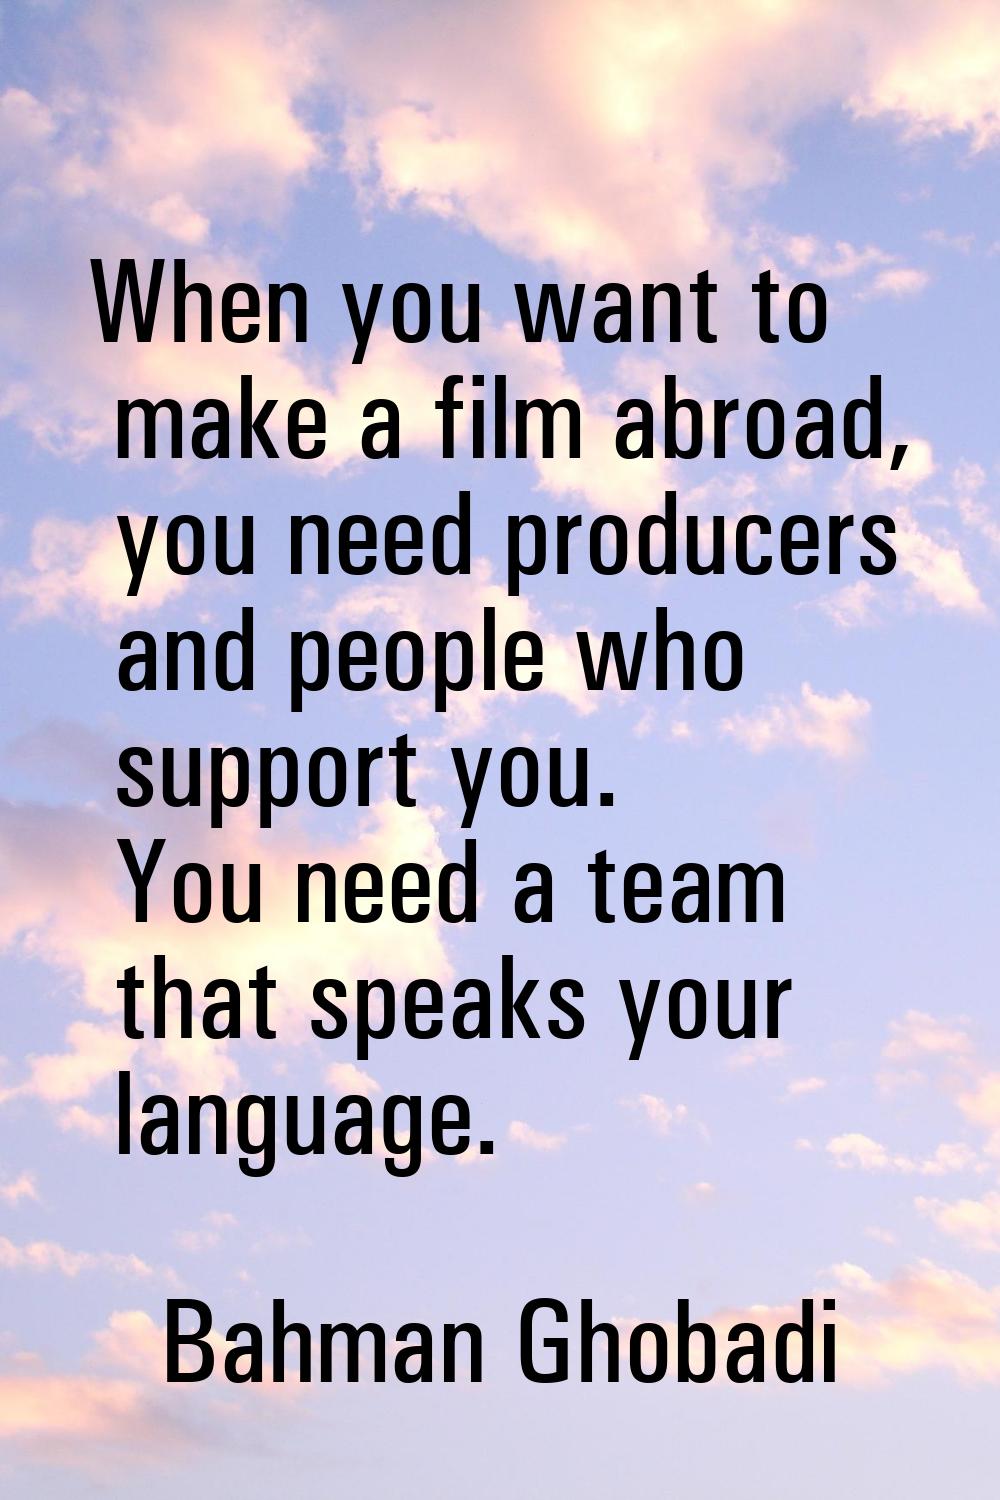 When you want to make a film abroad, you need producers and people who support you. You need a team